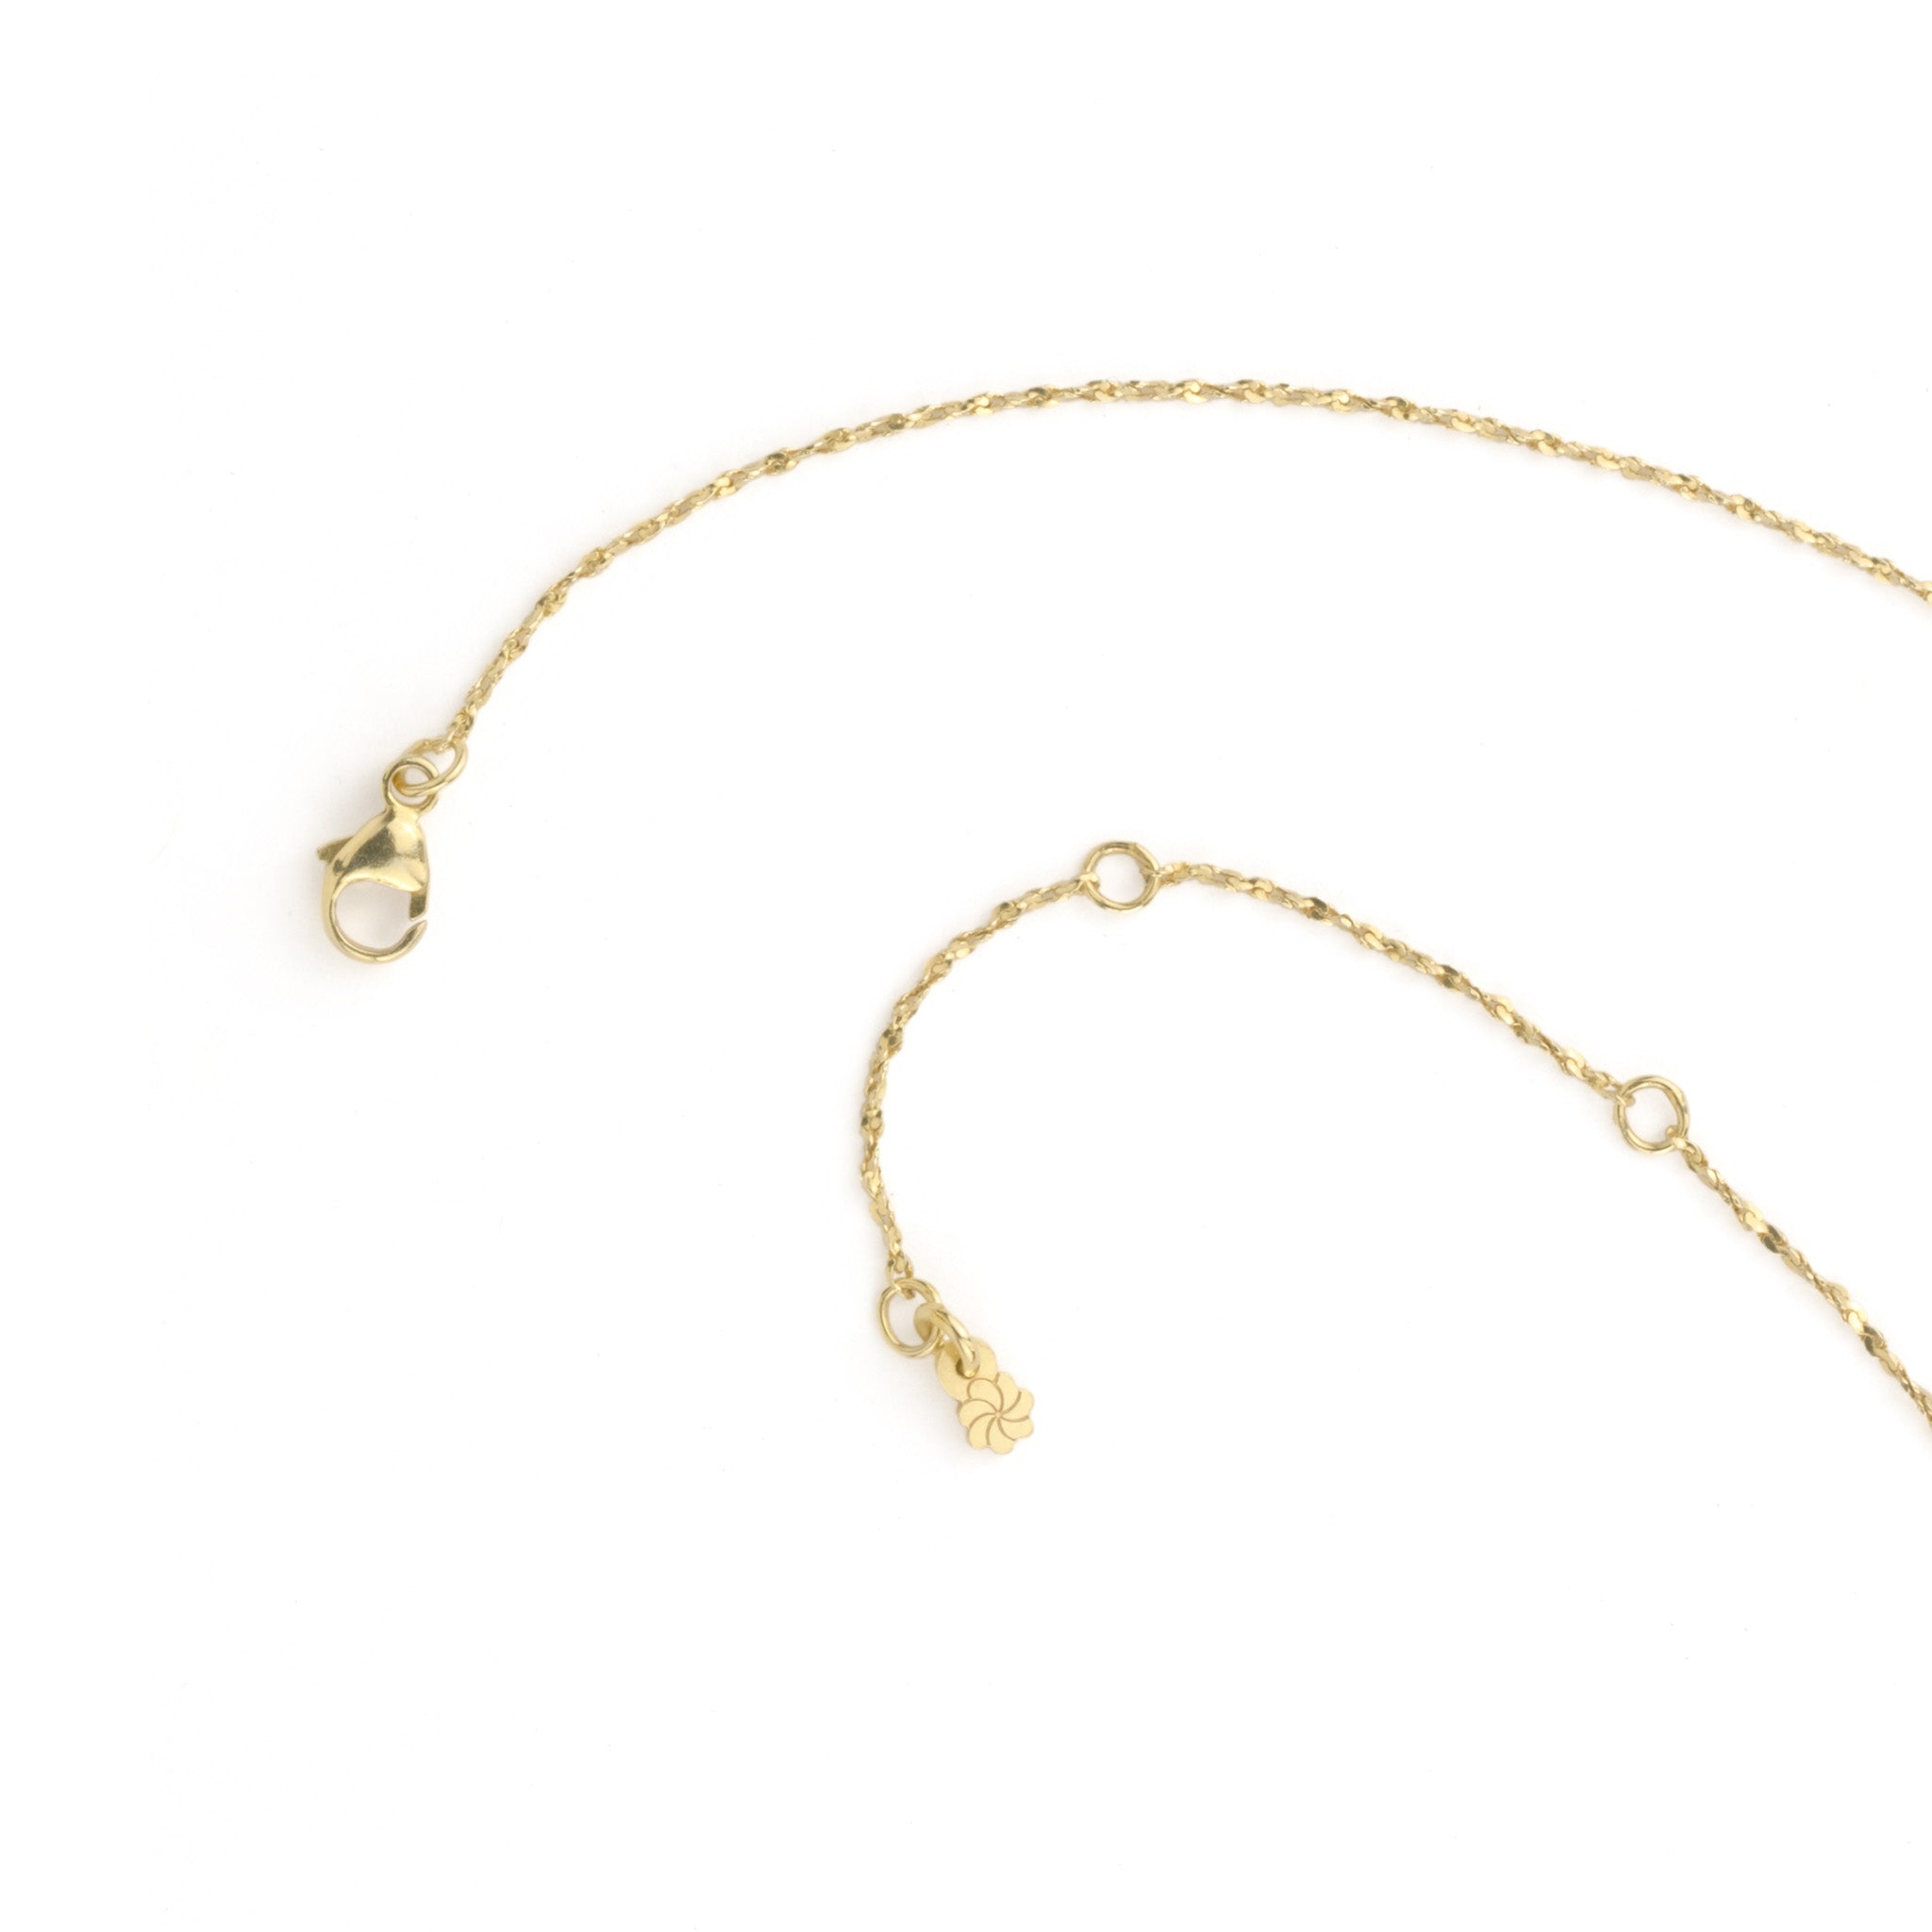 An Aiden Jae Starshine Chain Necklace on a white background.